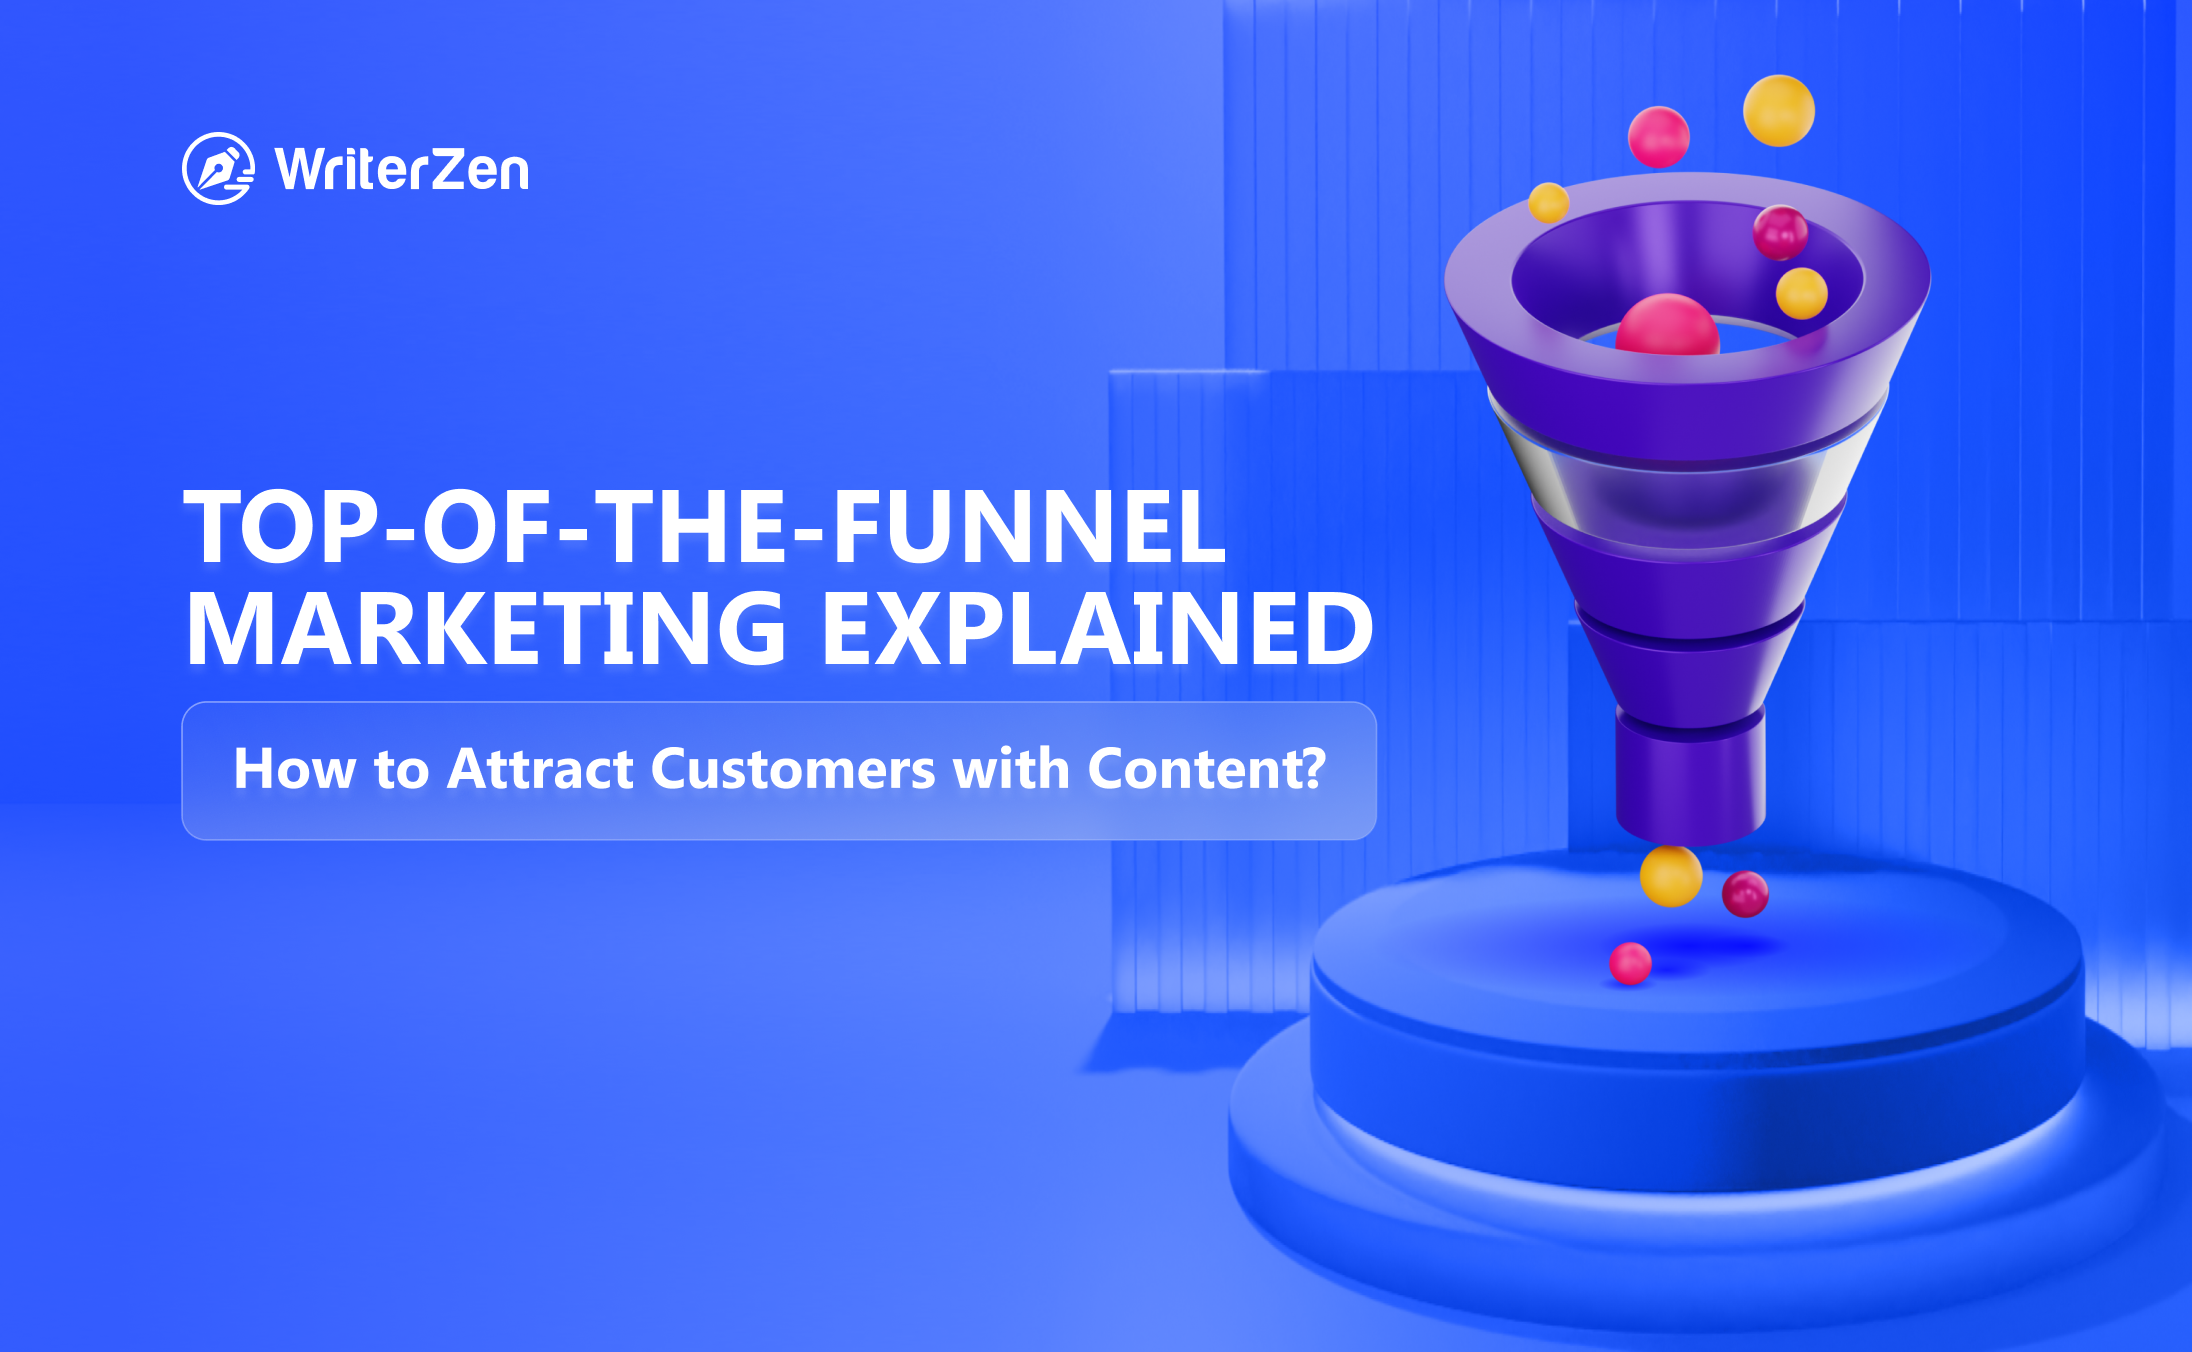 Top-of-the-Funnel Marketing Explained: How to Attract Customers with Content